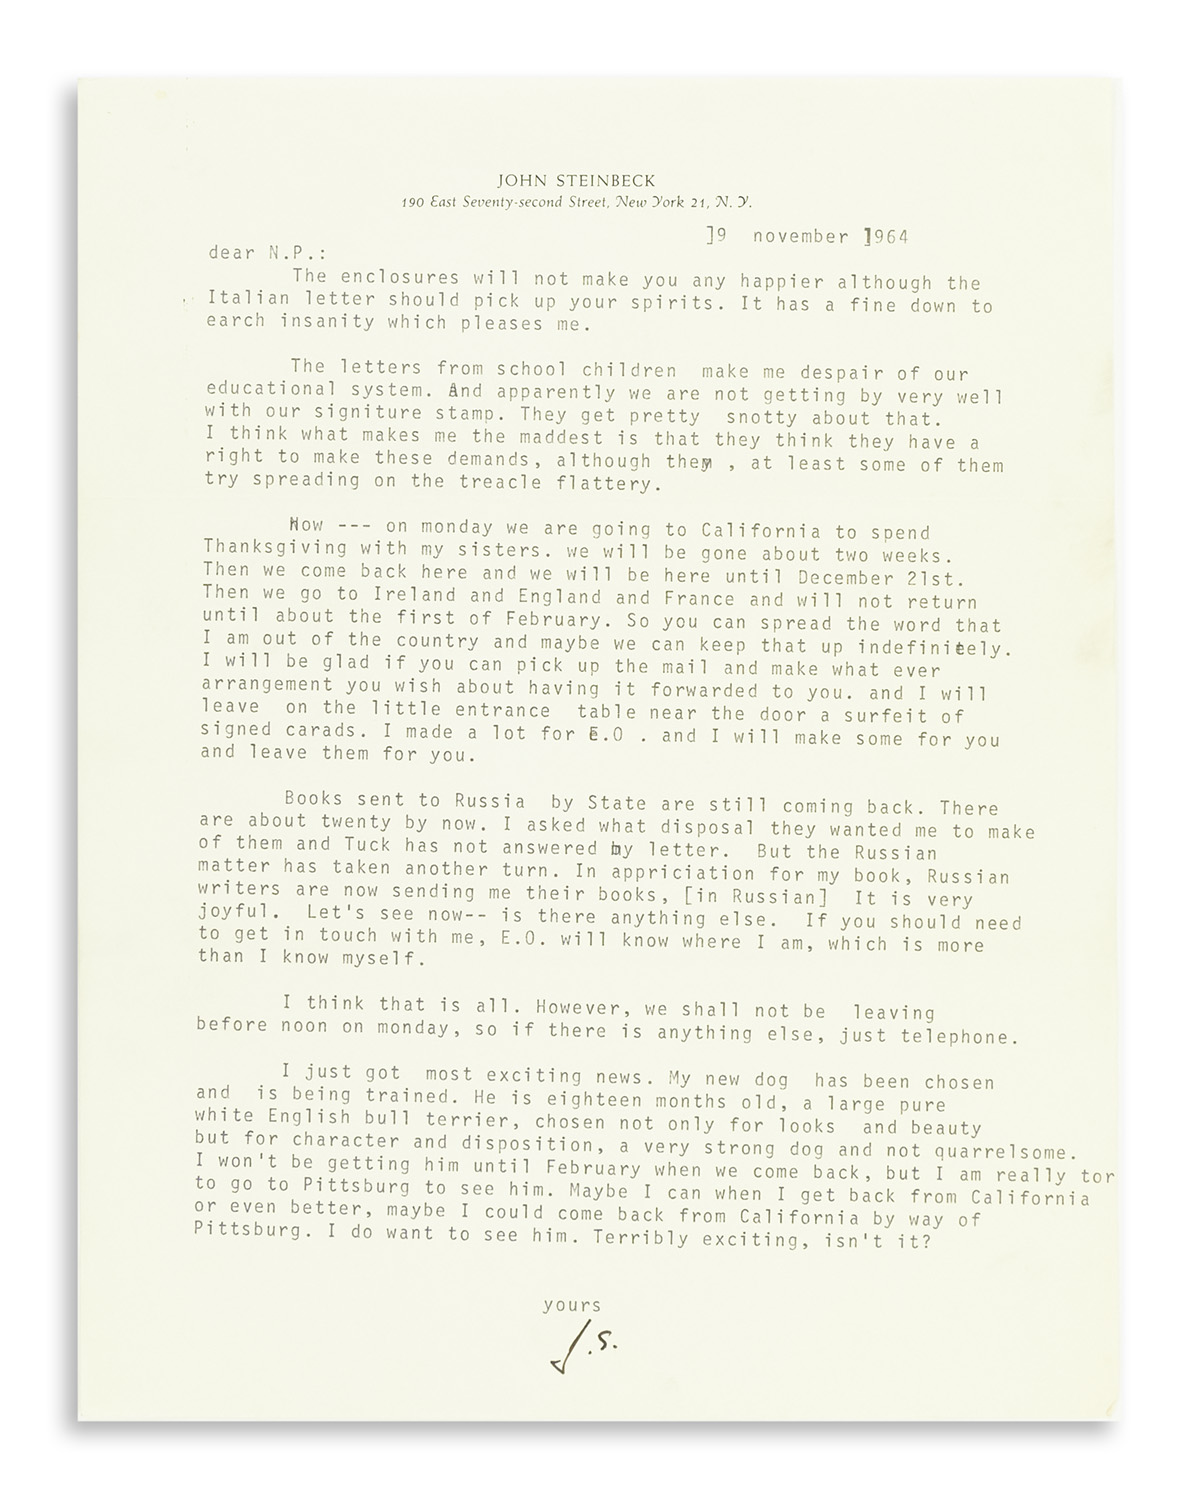 STEINBECK, JOHN. Typed Letter Signed, J.S., to dear N.P.,